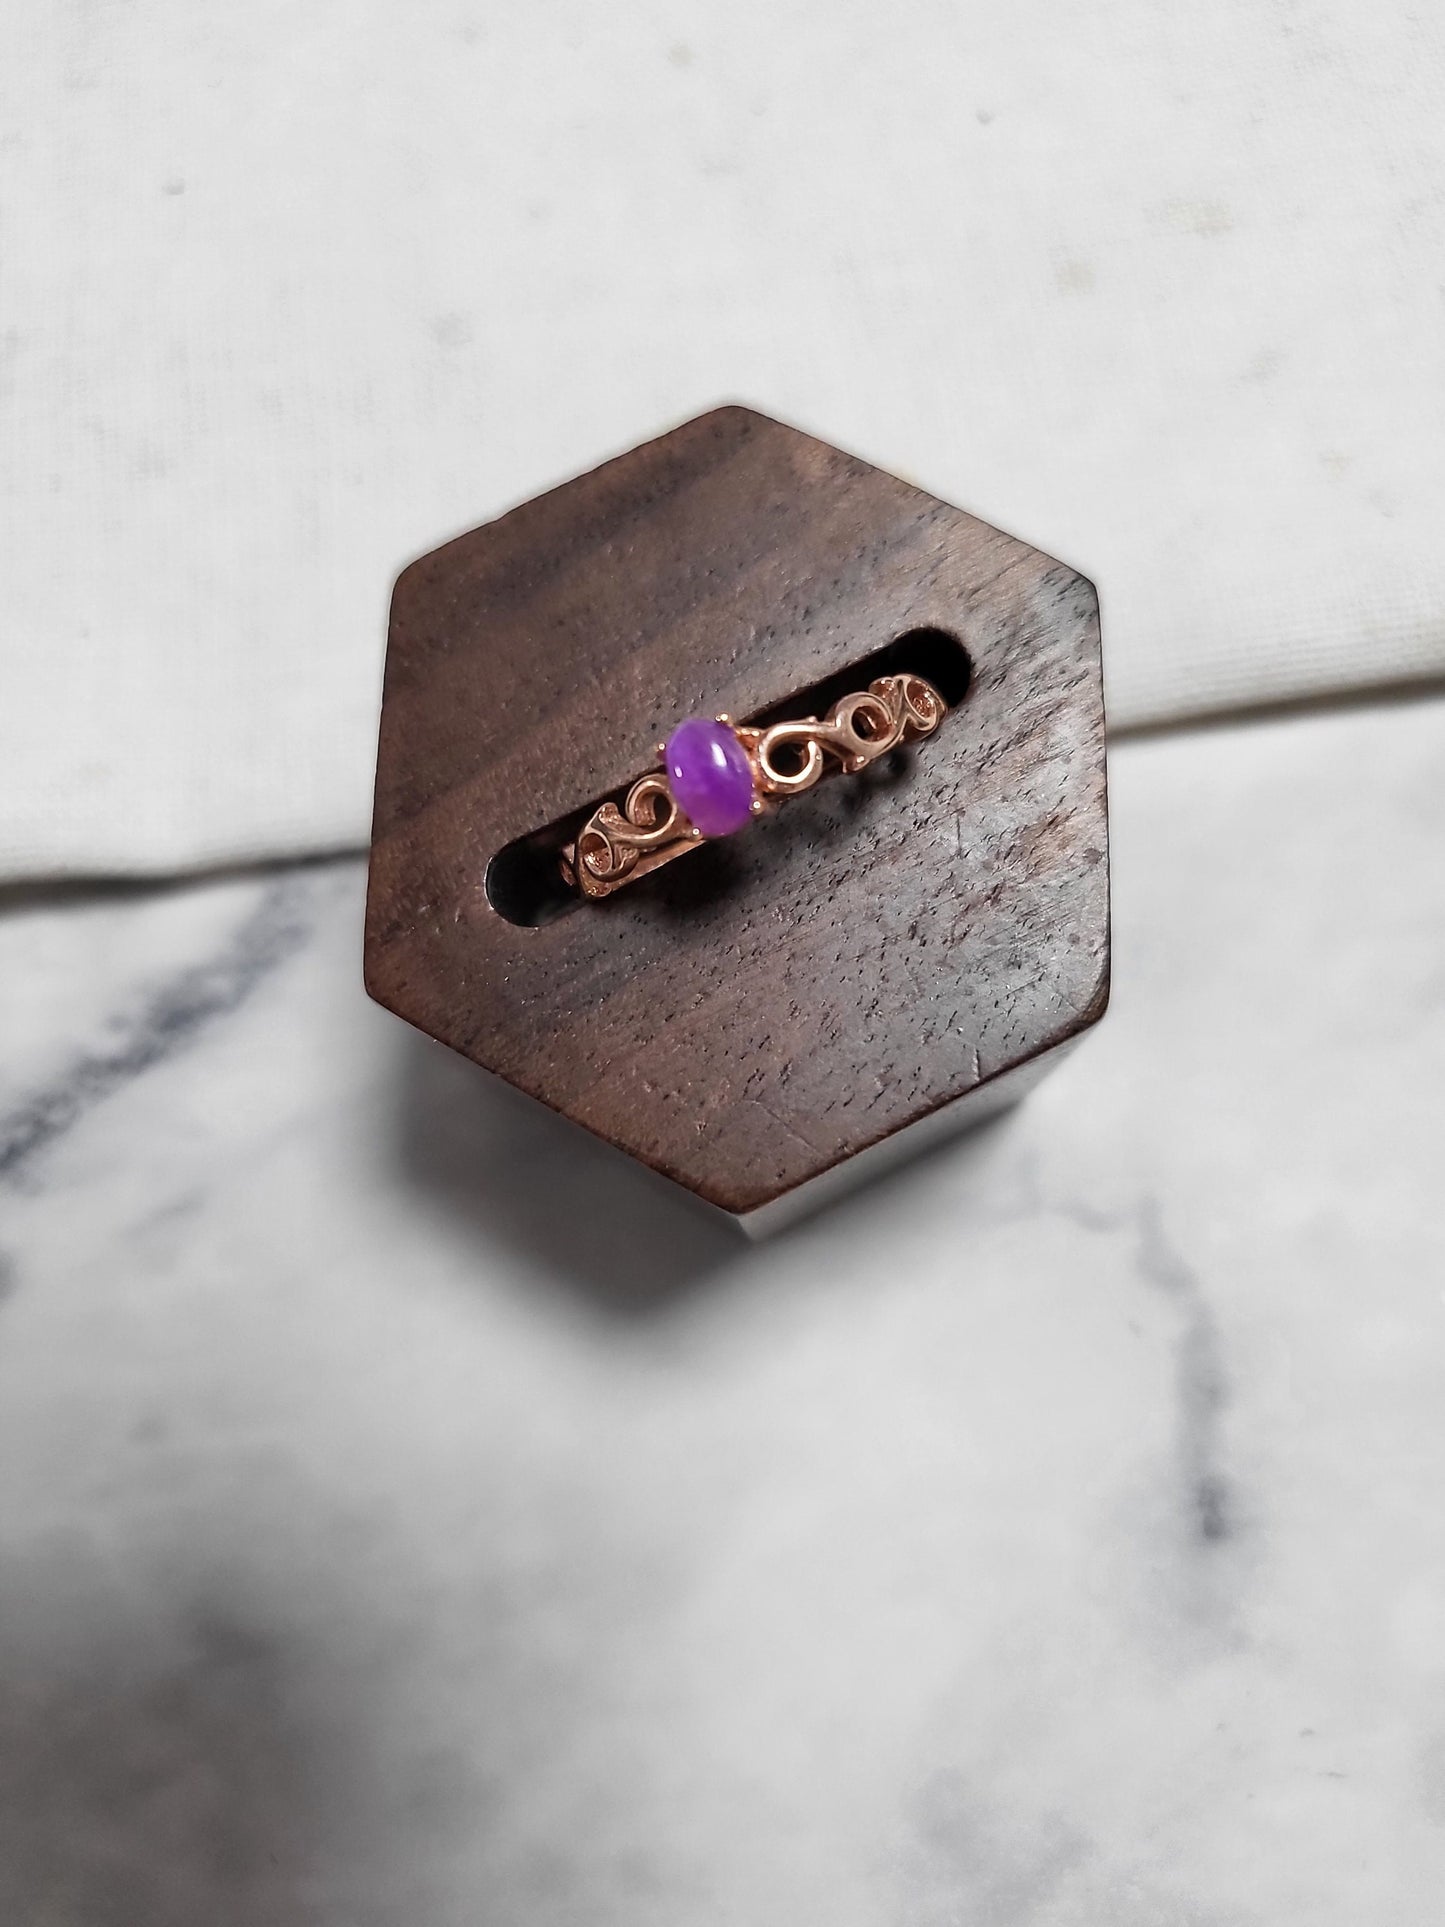 RARE Natural Sugilite Ring Purple Gemstone Dainty Adjustable Rose Gold Ring with Crystals